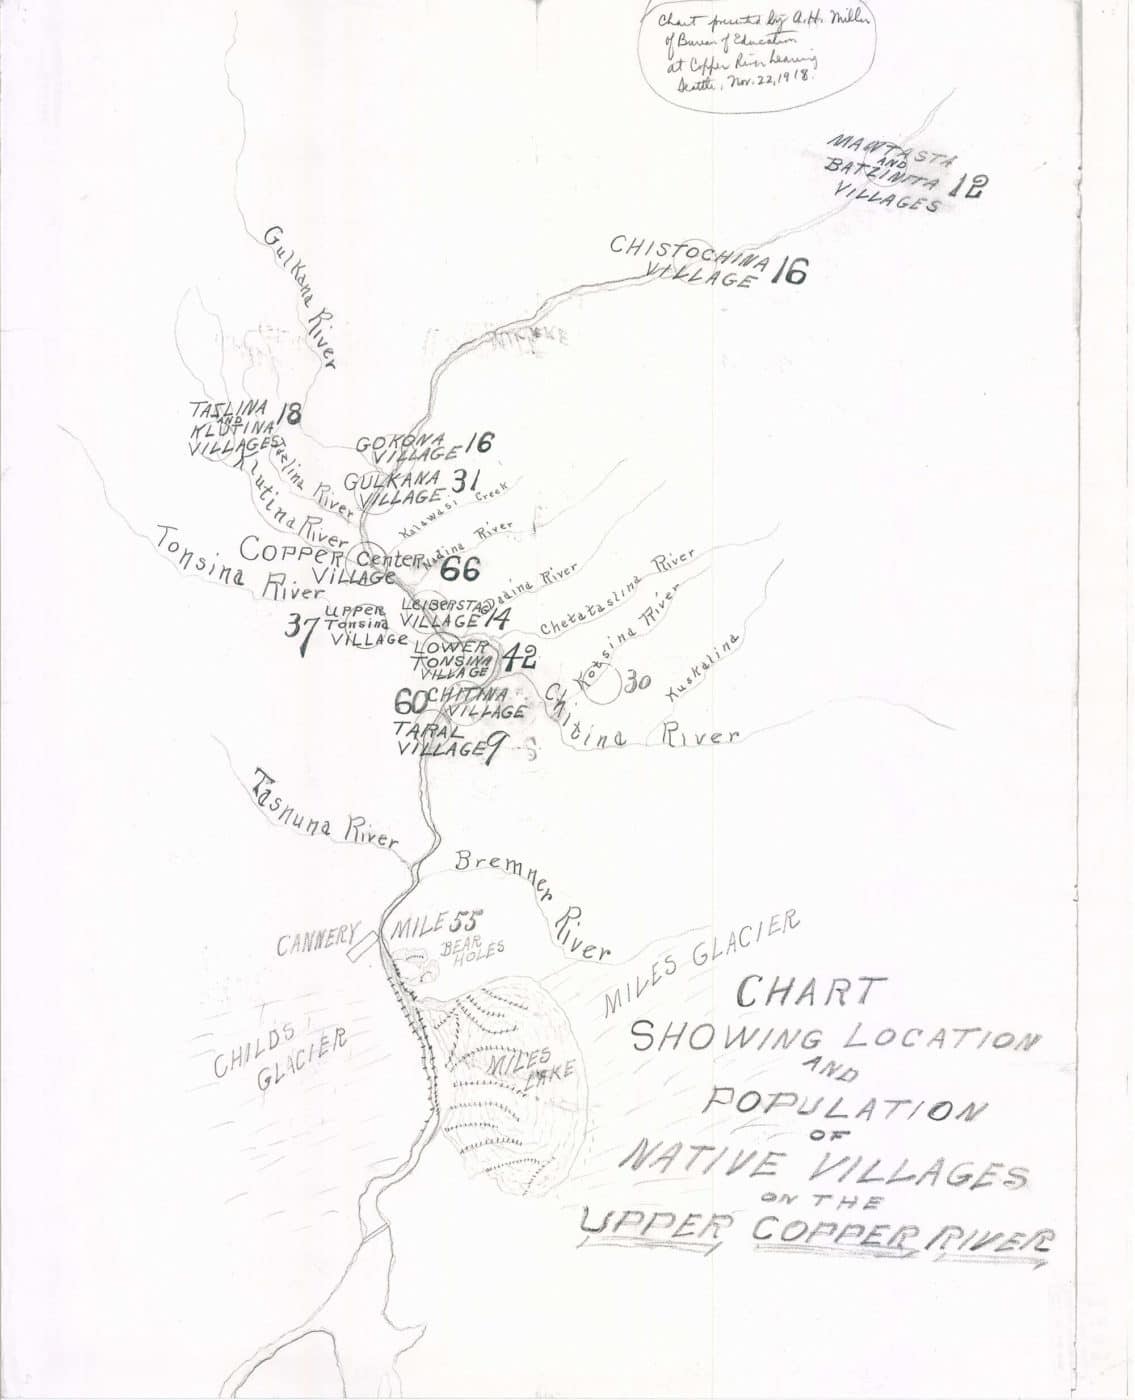 This map was used by A.H. Miller of the U.S. Department of Education to defend the Ahtna’s position against the commercial fishery. It was made in November 1918 and shows the location of Ahtna villages and populations. At the bottom of the map are canneries located at mile 55 and the commercial fishing nets in Miles Lake.